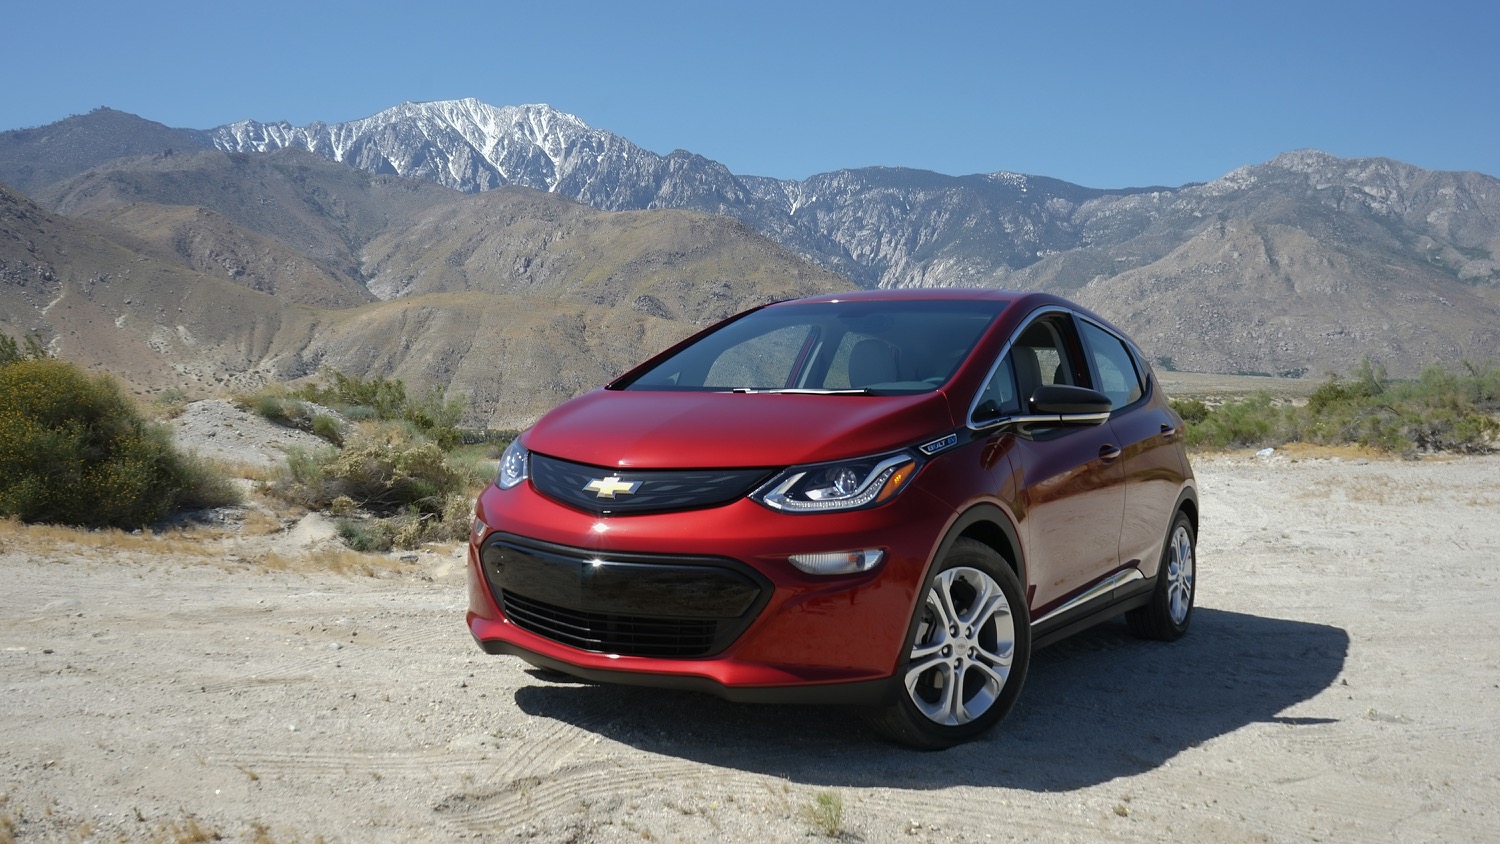 new slate gray metallic color for the 2019 chevy bolt ev first look